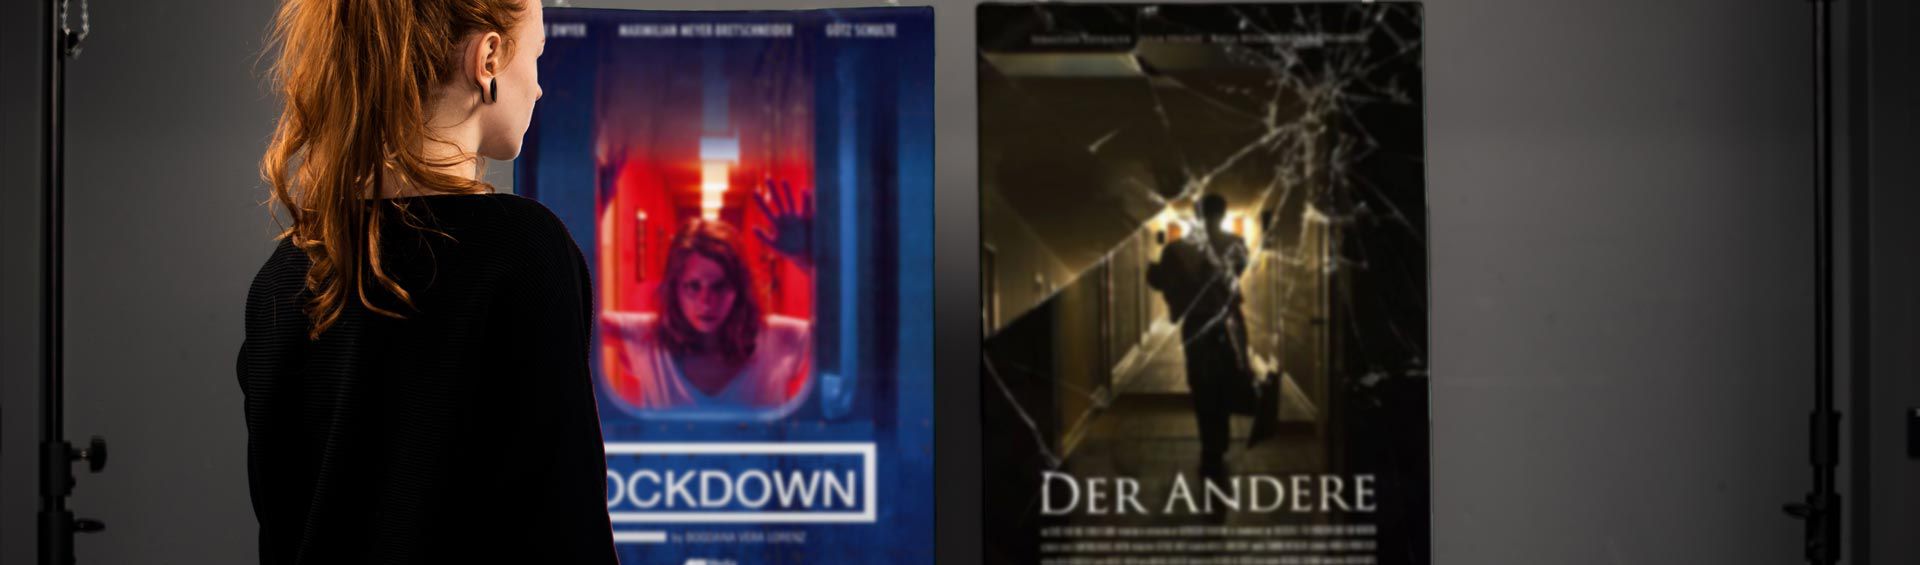 Photography of Nina Lesznik standing in front of hanging posters showing her Production Design Projects "Lockdown" and "Der Andere"